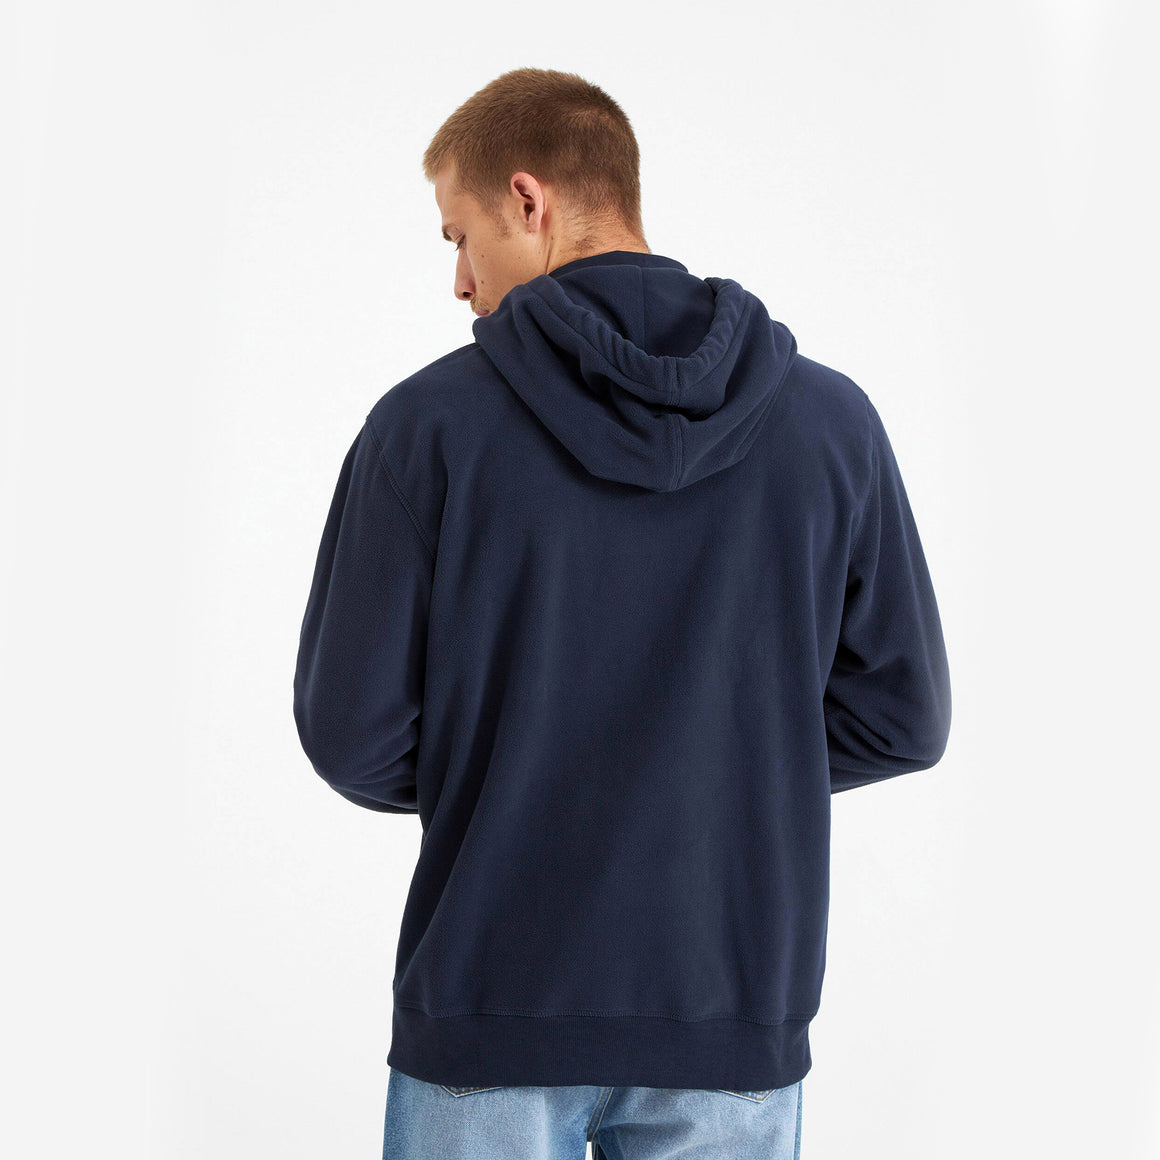 54 FLORAL PREMIUM PULLOVER HOODY - NAVY BLUE